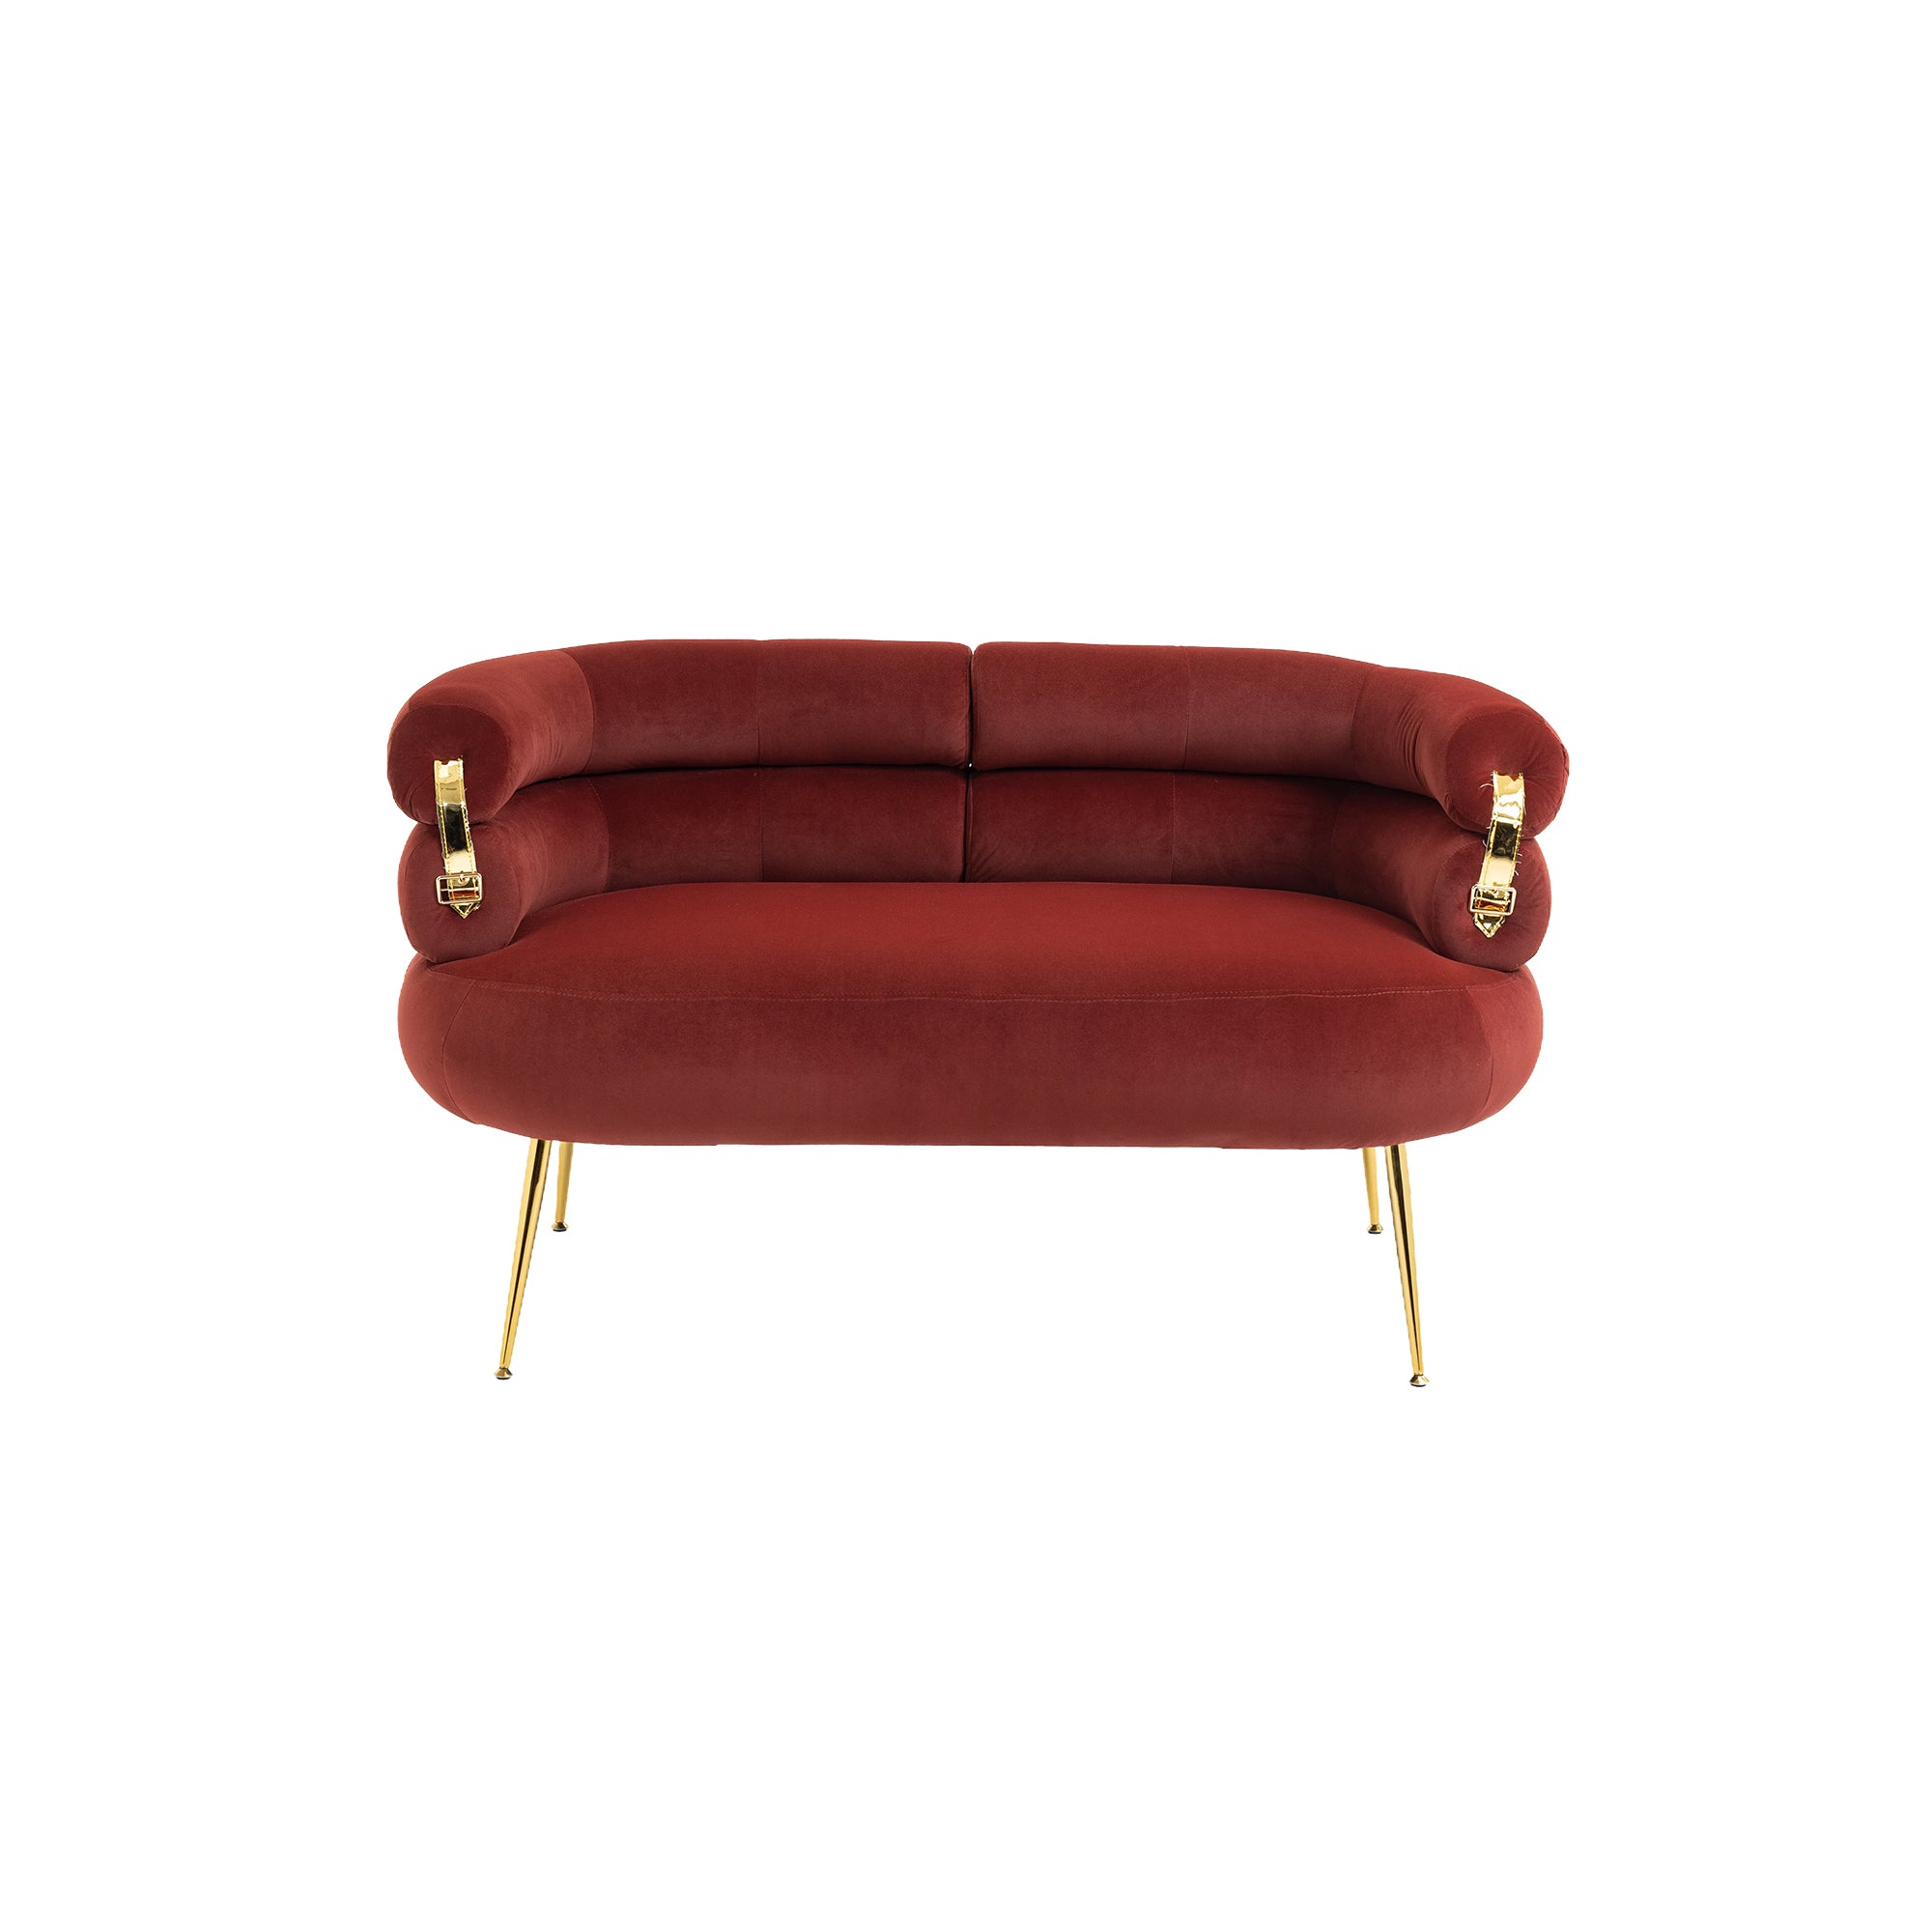 COOLMORE Accent Chair ,leisure chair with Golden feet wine red-velvet